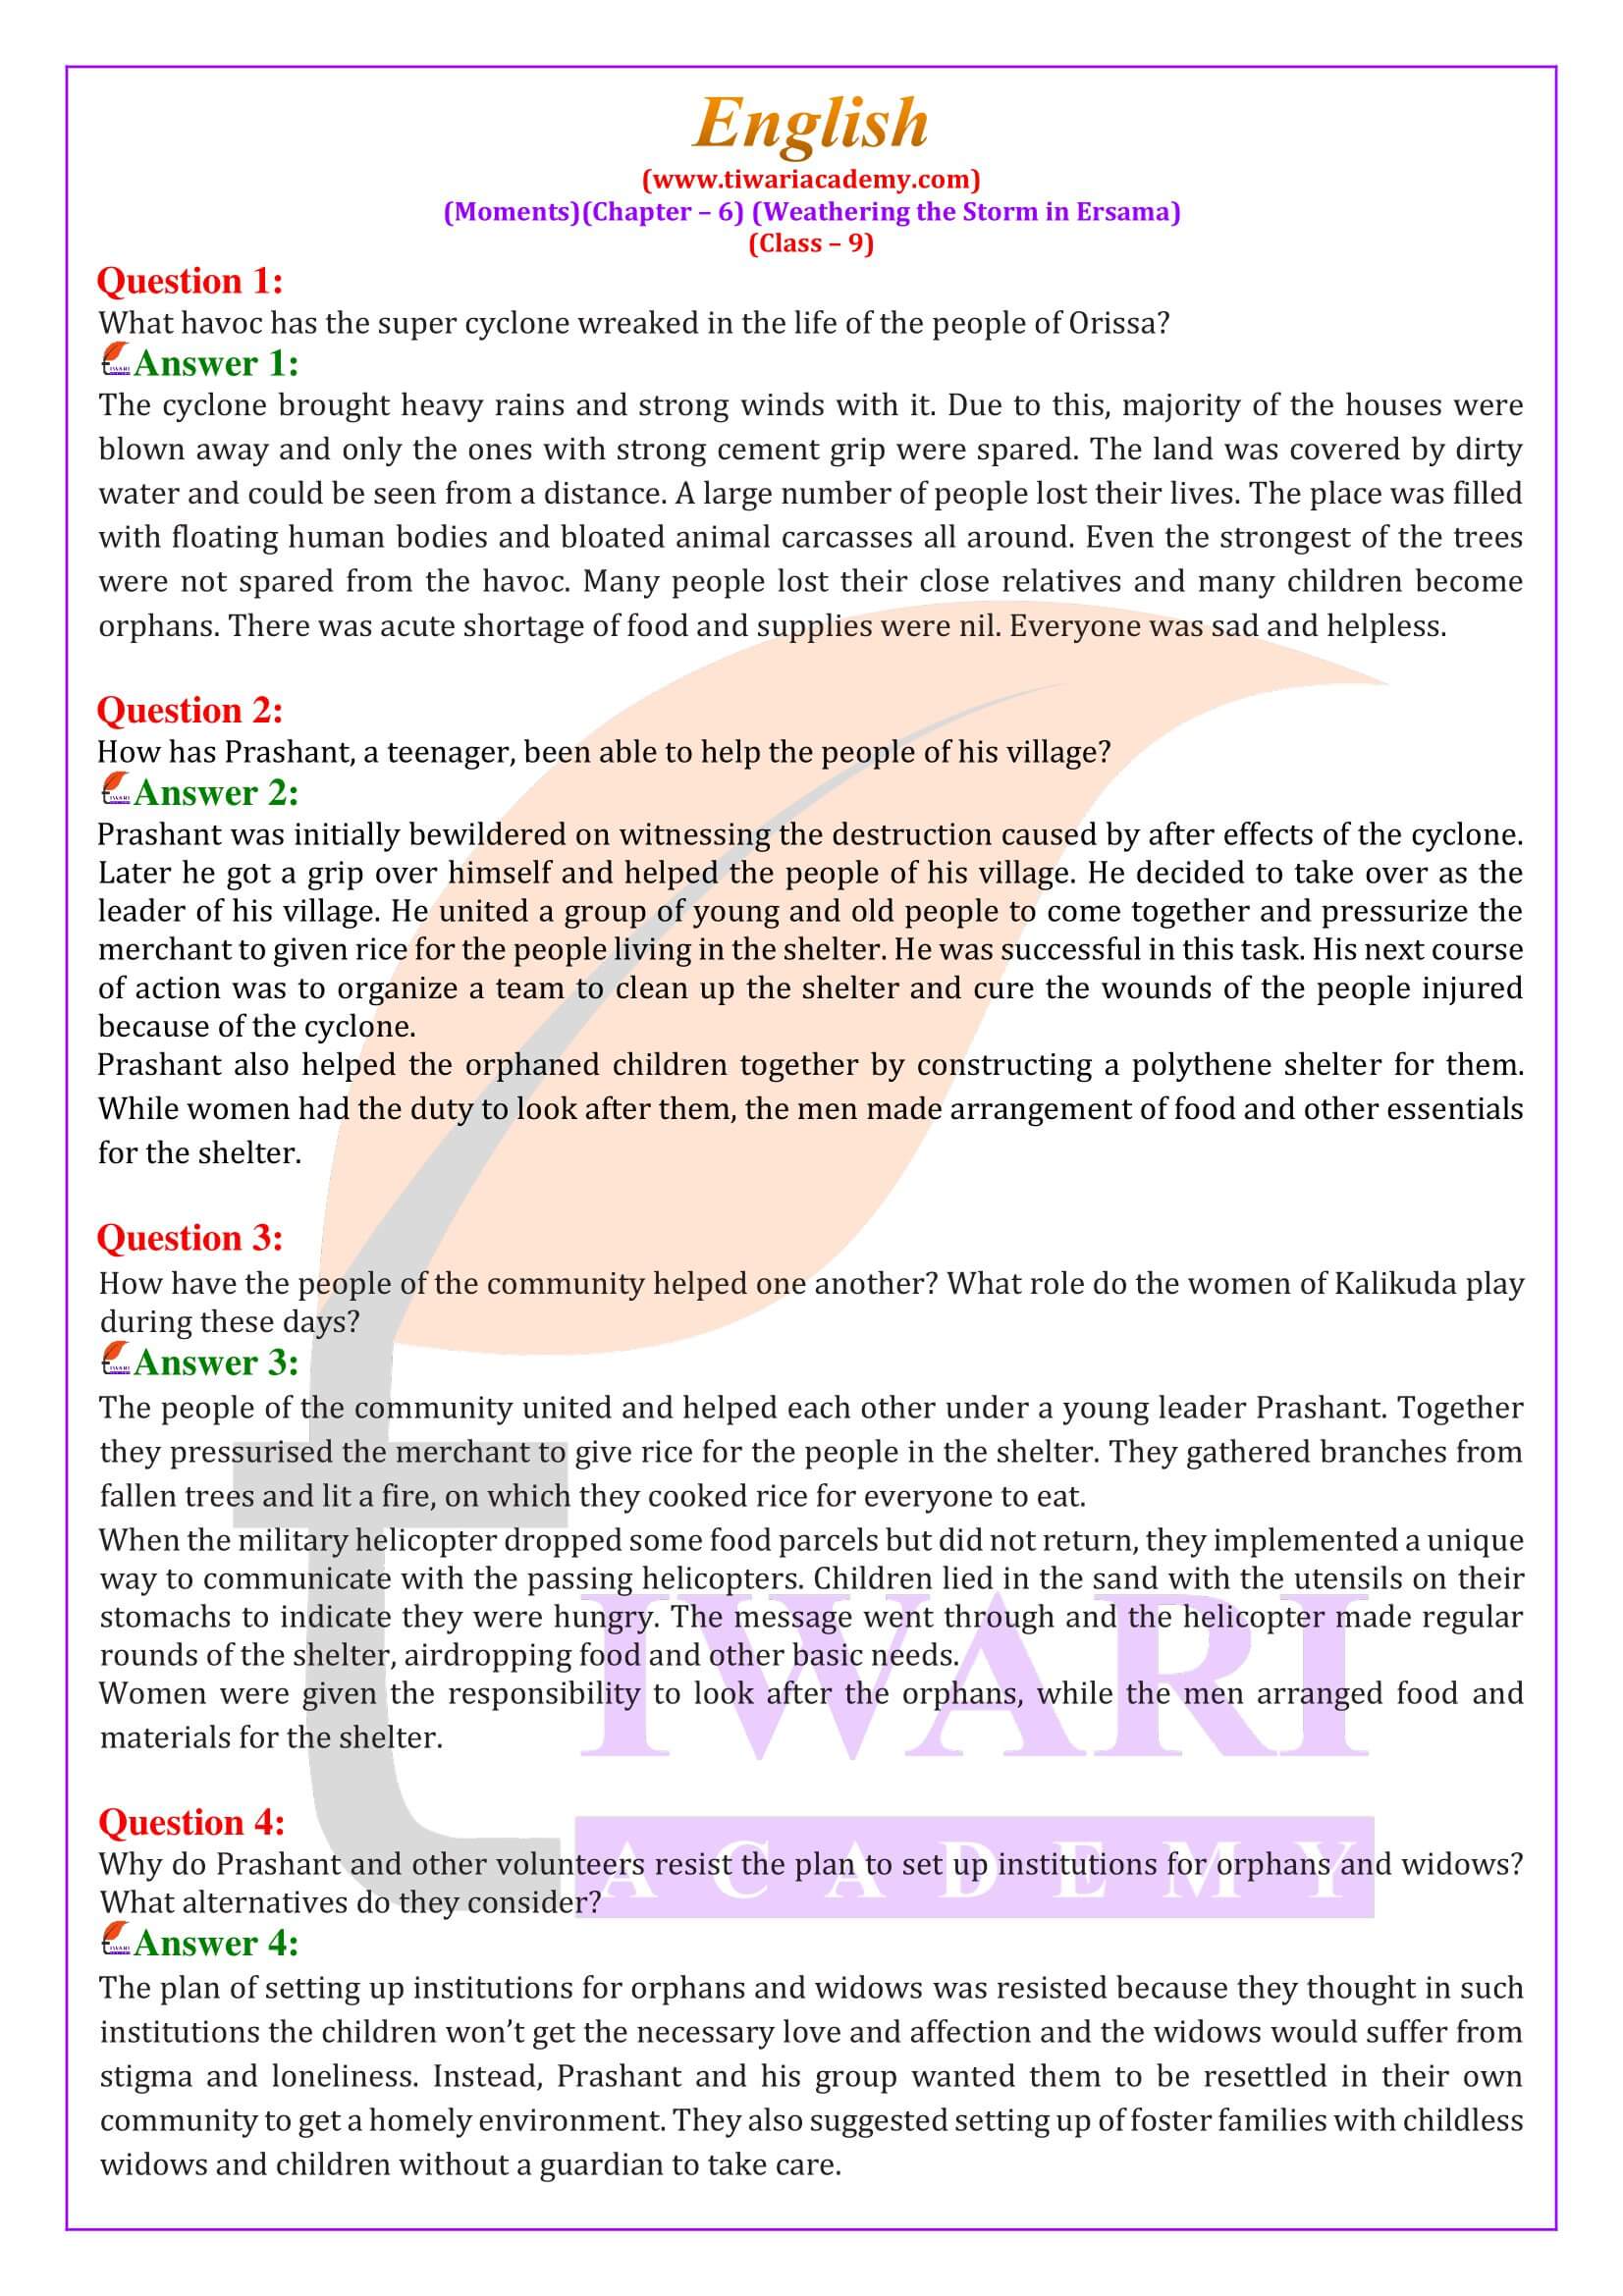 NCERT Solutions for Class 9 English Moments Chapter 6